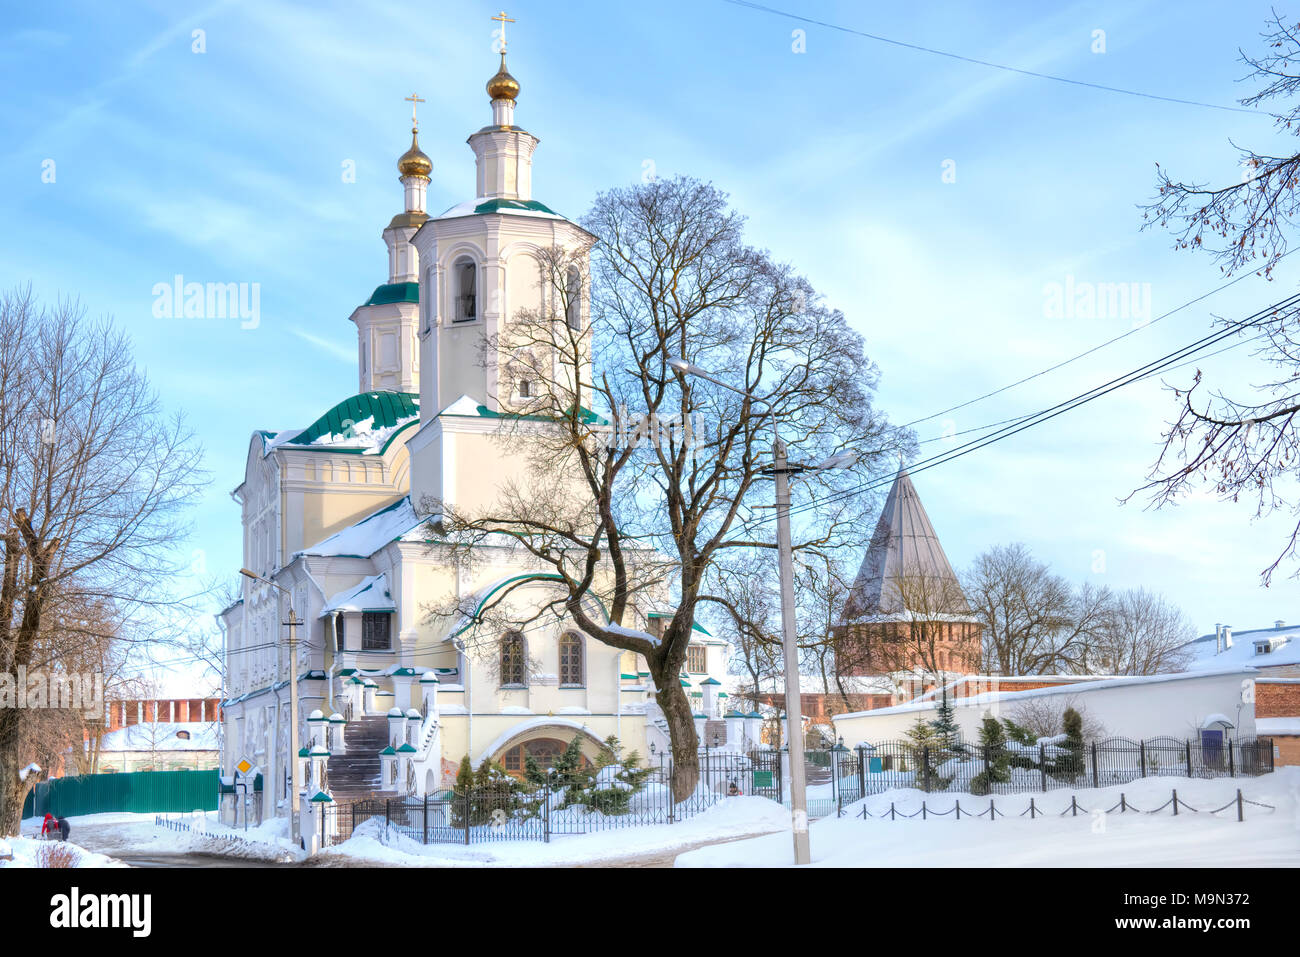 The oldest in the city of Smolensk the Transfiguration of Our Savior Avraamiev Monastery and the Transfiguration Cathedral Stock Photo